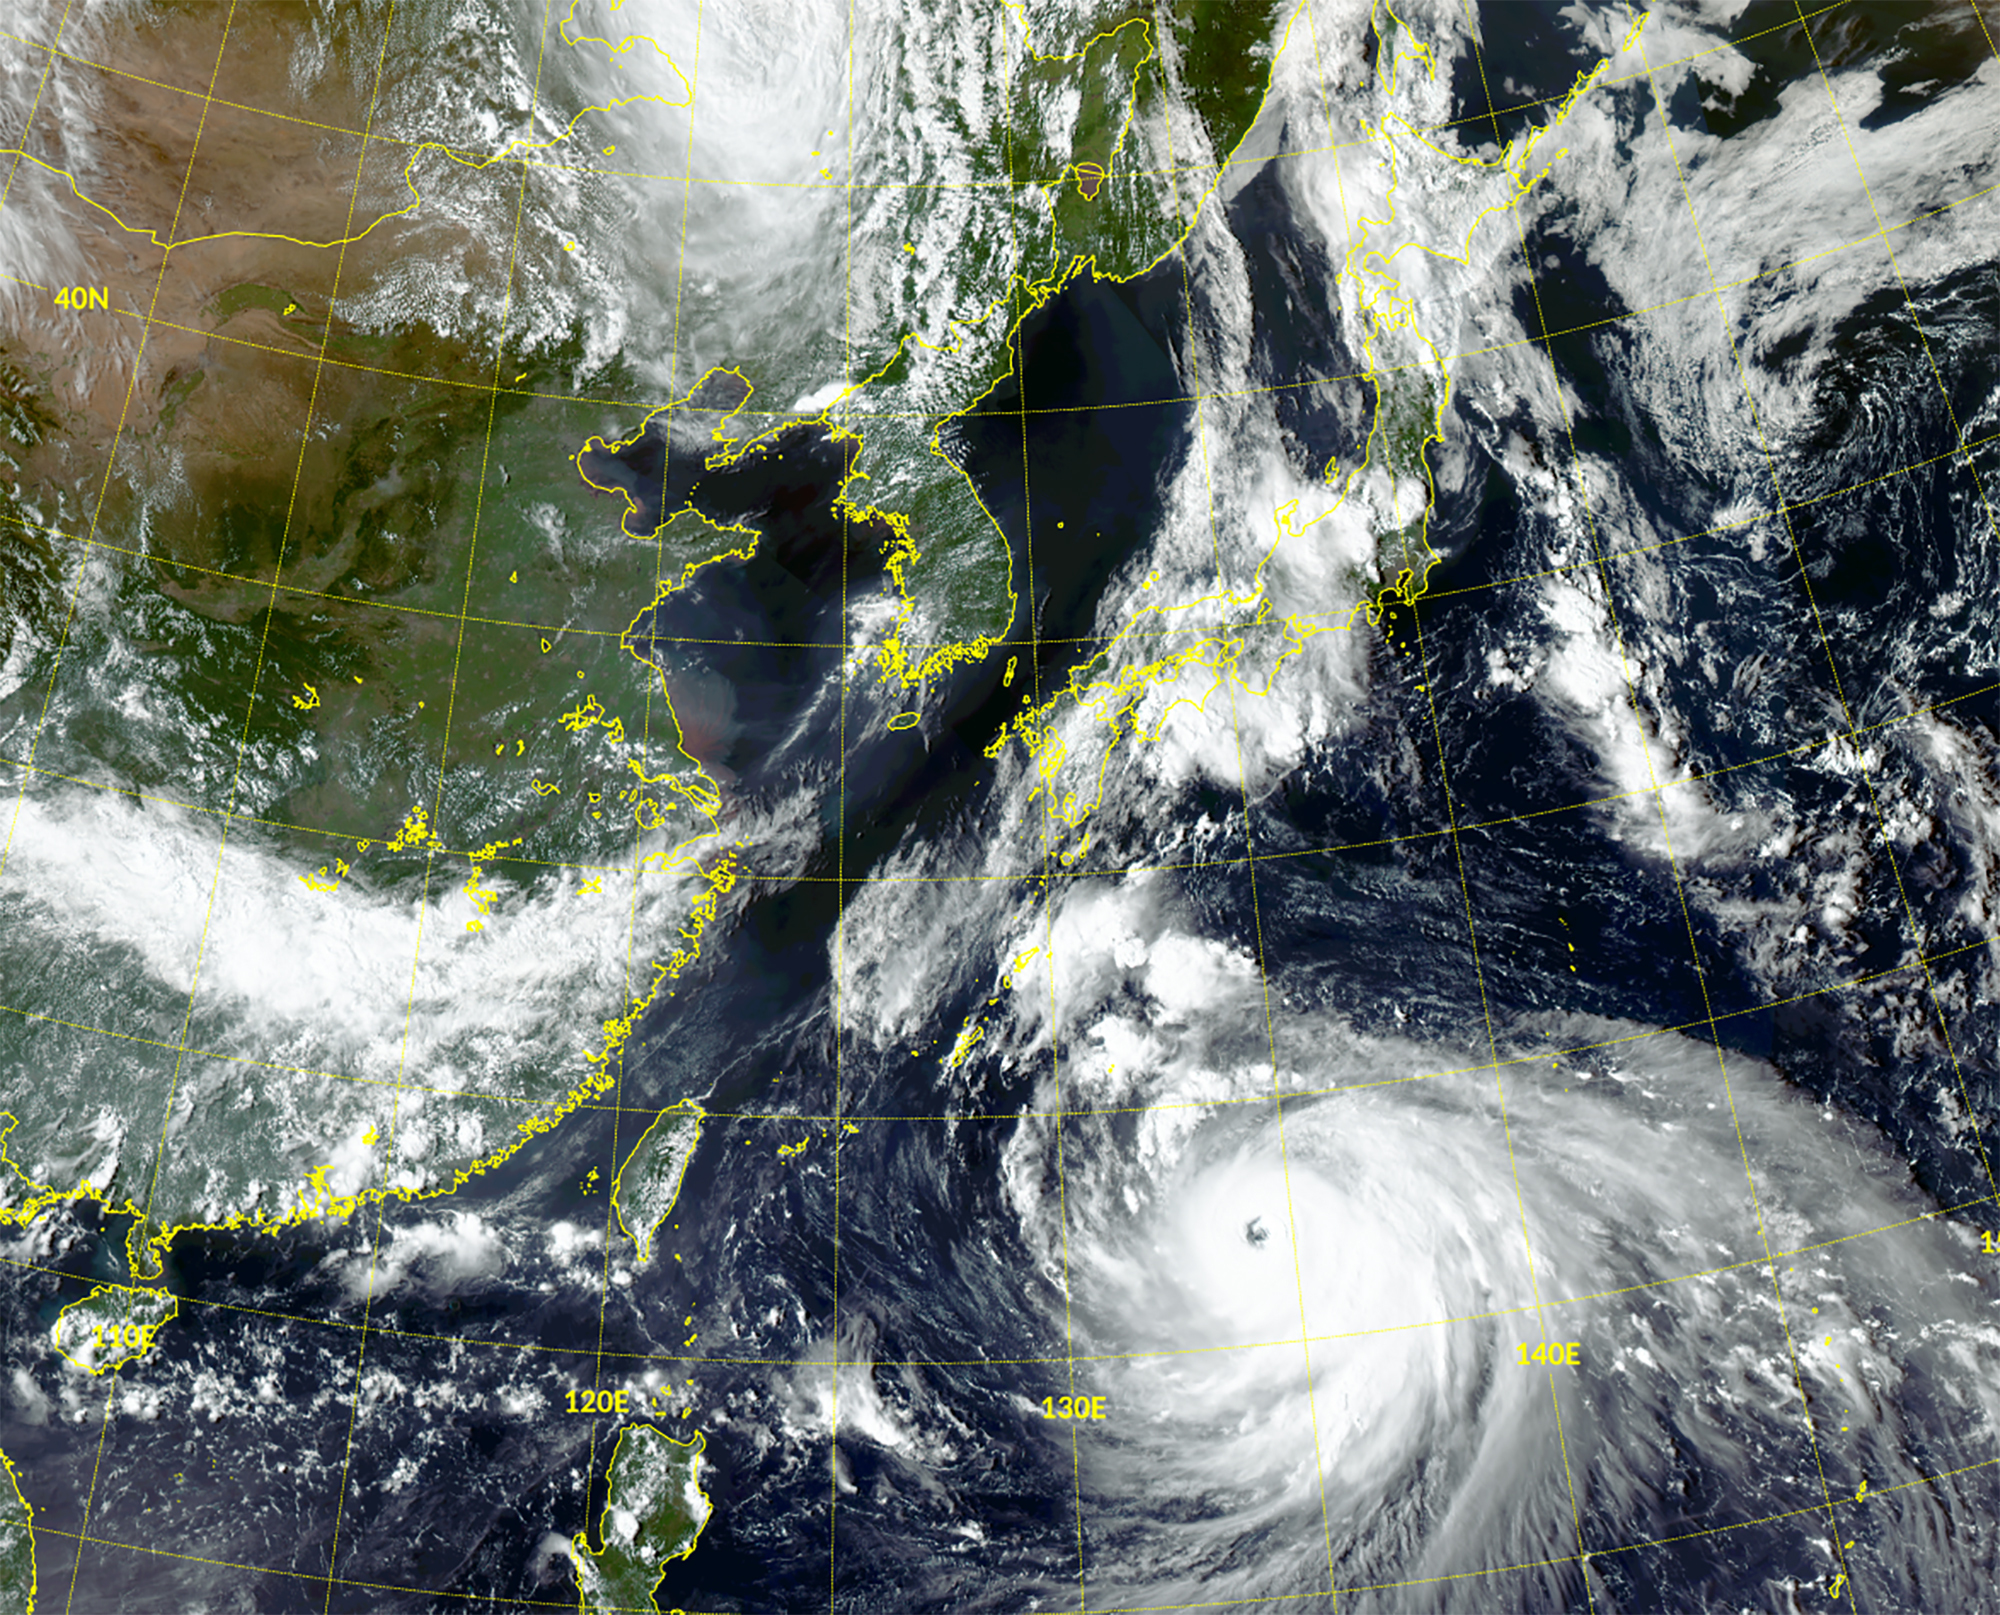 “In an unsustainable global environment, every nation will suffer”: Typhoon Haishen on 4 September 2020.